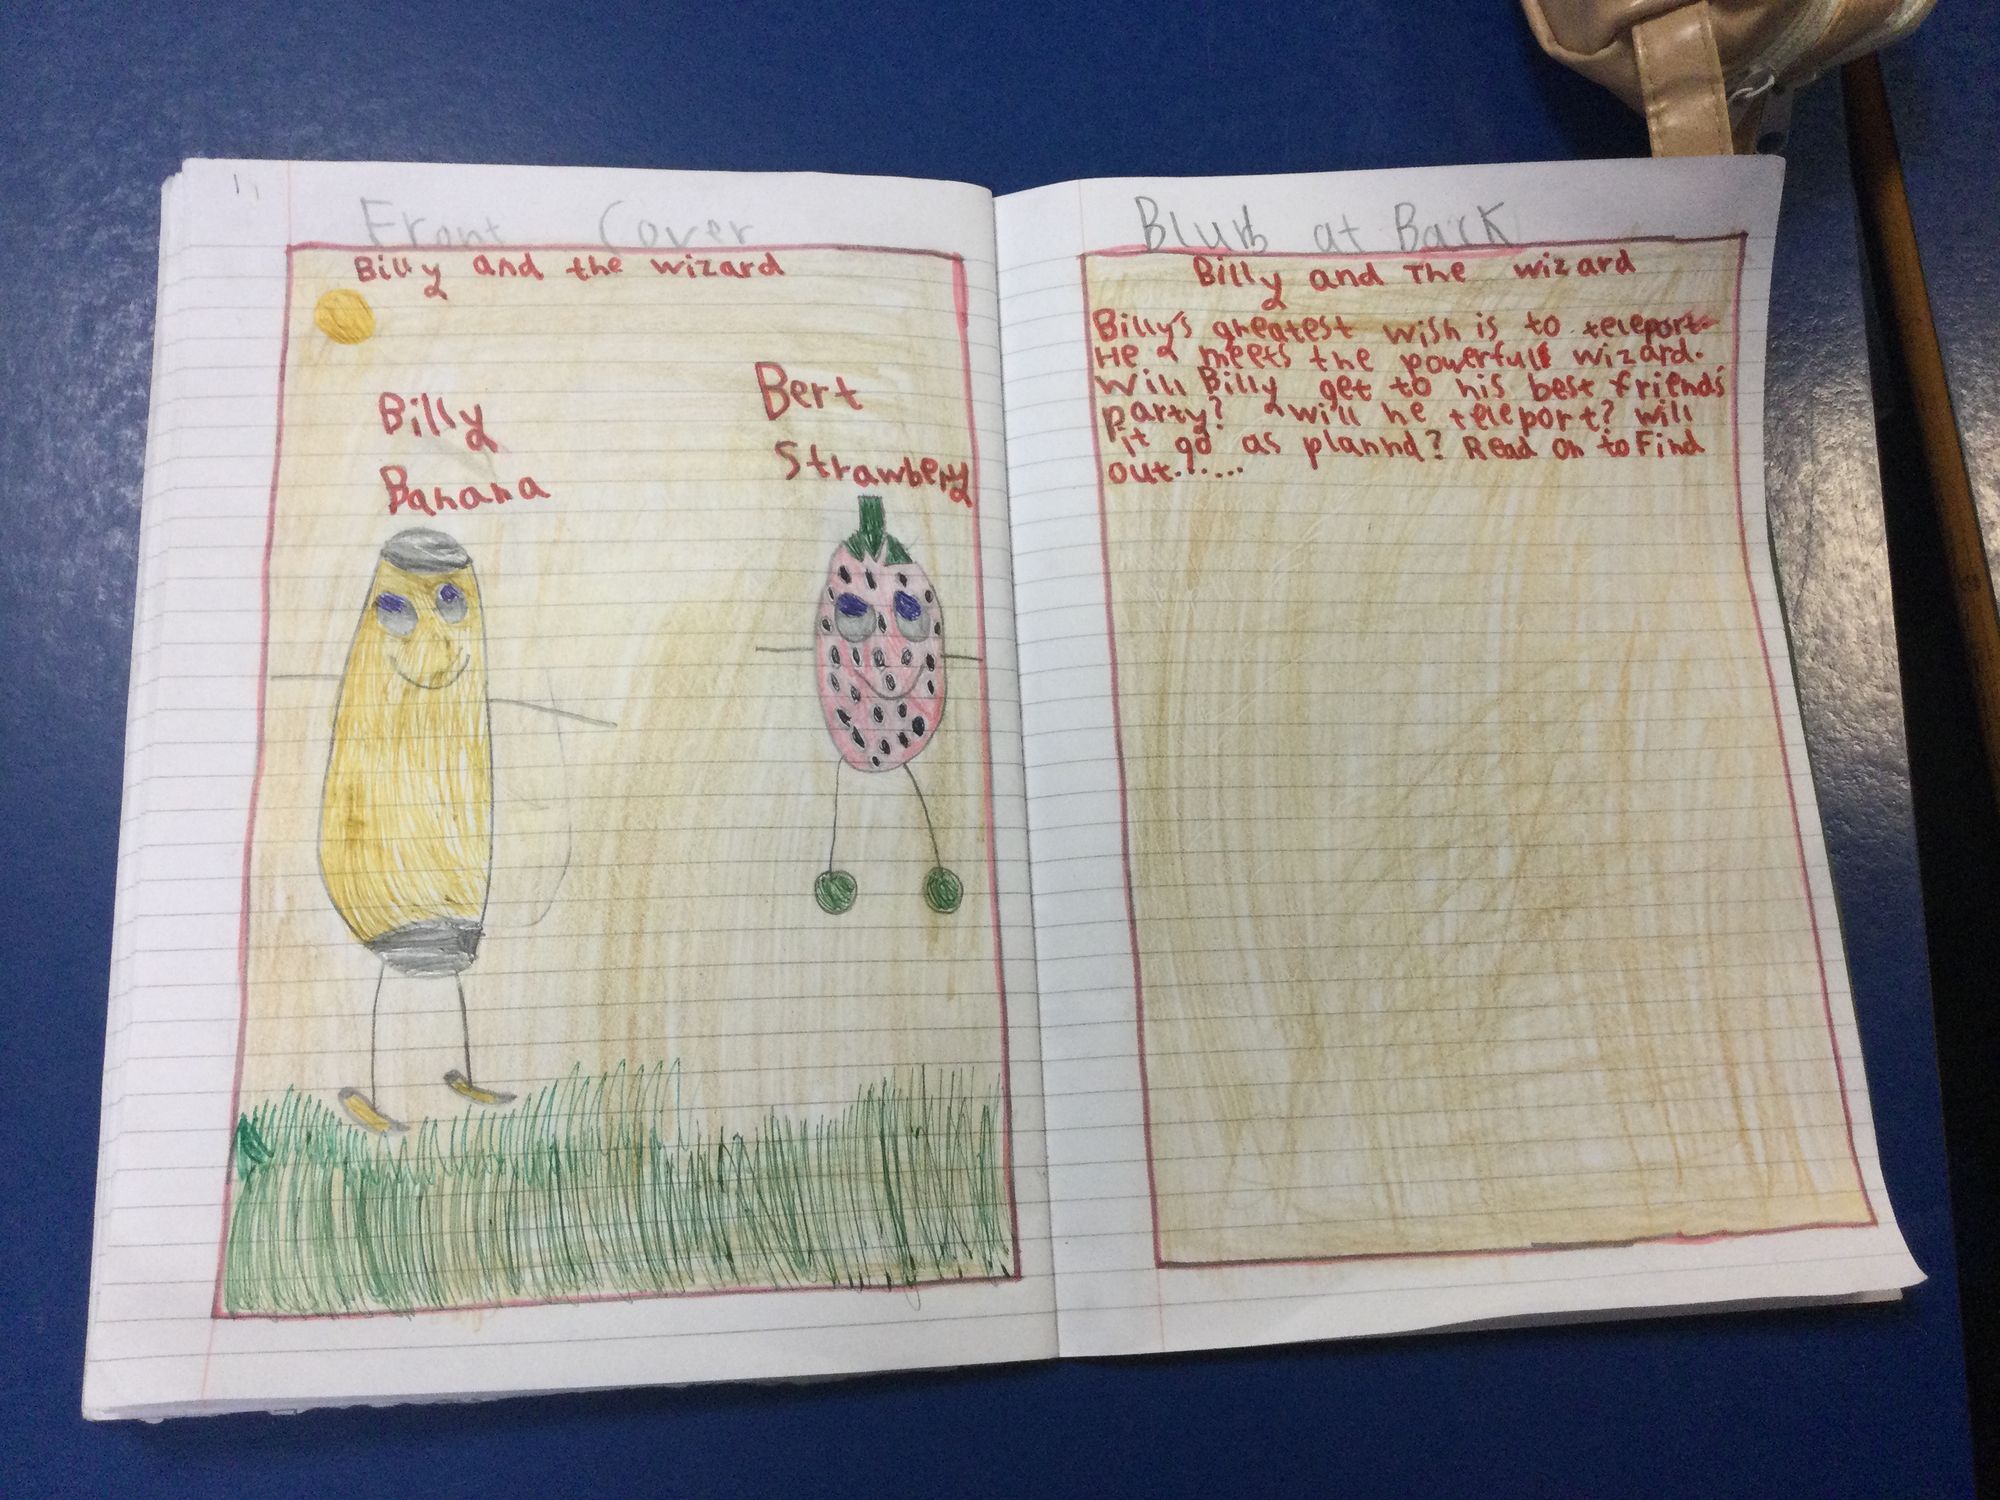 Story Seeds workshop in Year 4